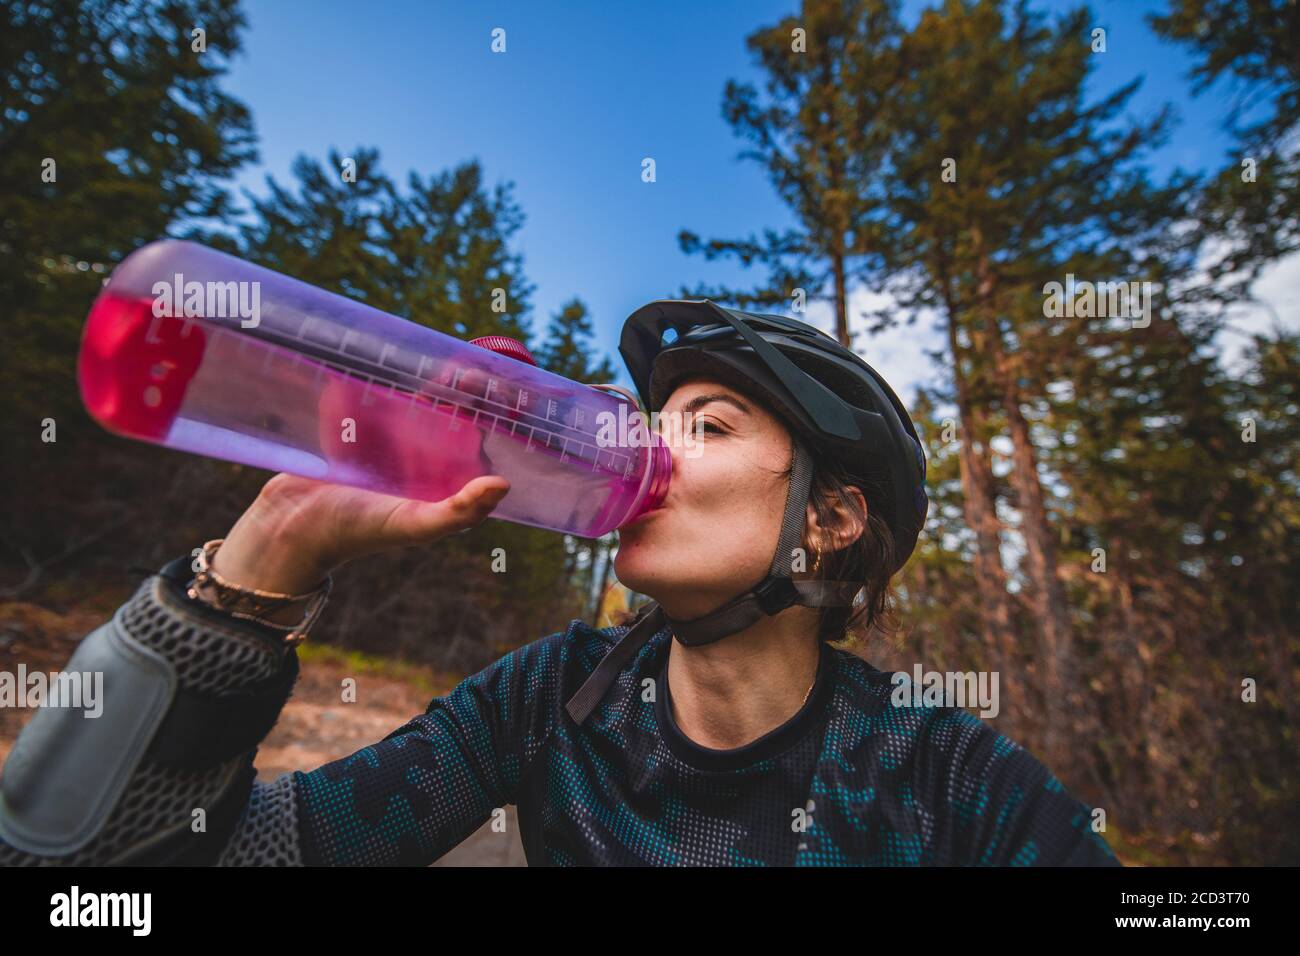 Female mountain-biker drinking from water-bottle in a forest in British Columbia, Canada. Stock Photo